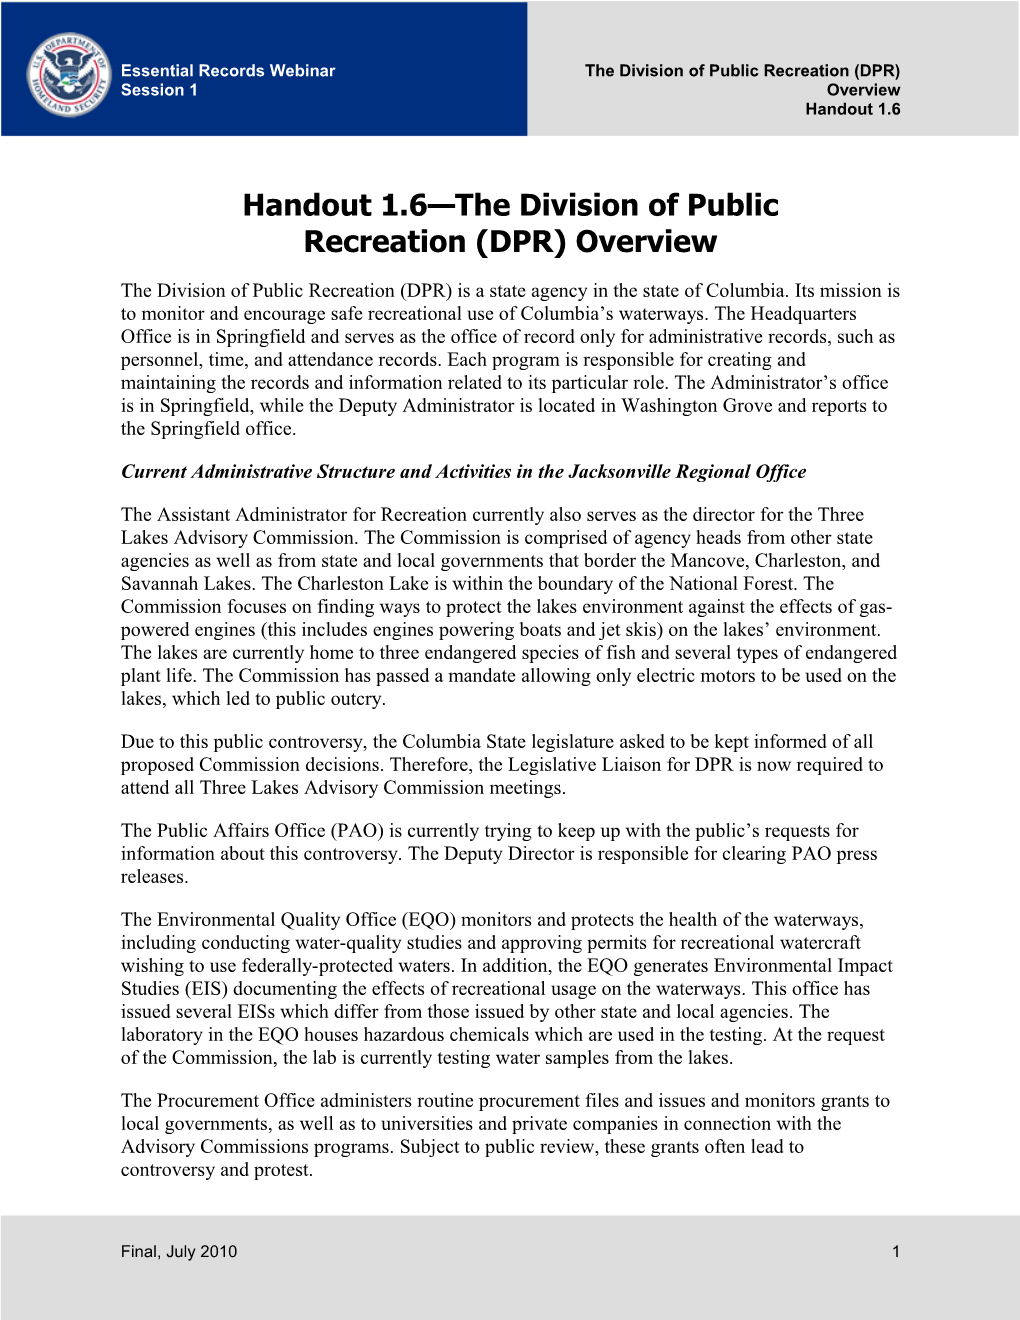 Handout 1.6 the Division of Public Recreation (DPR) Overview